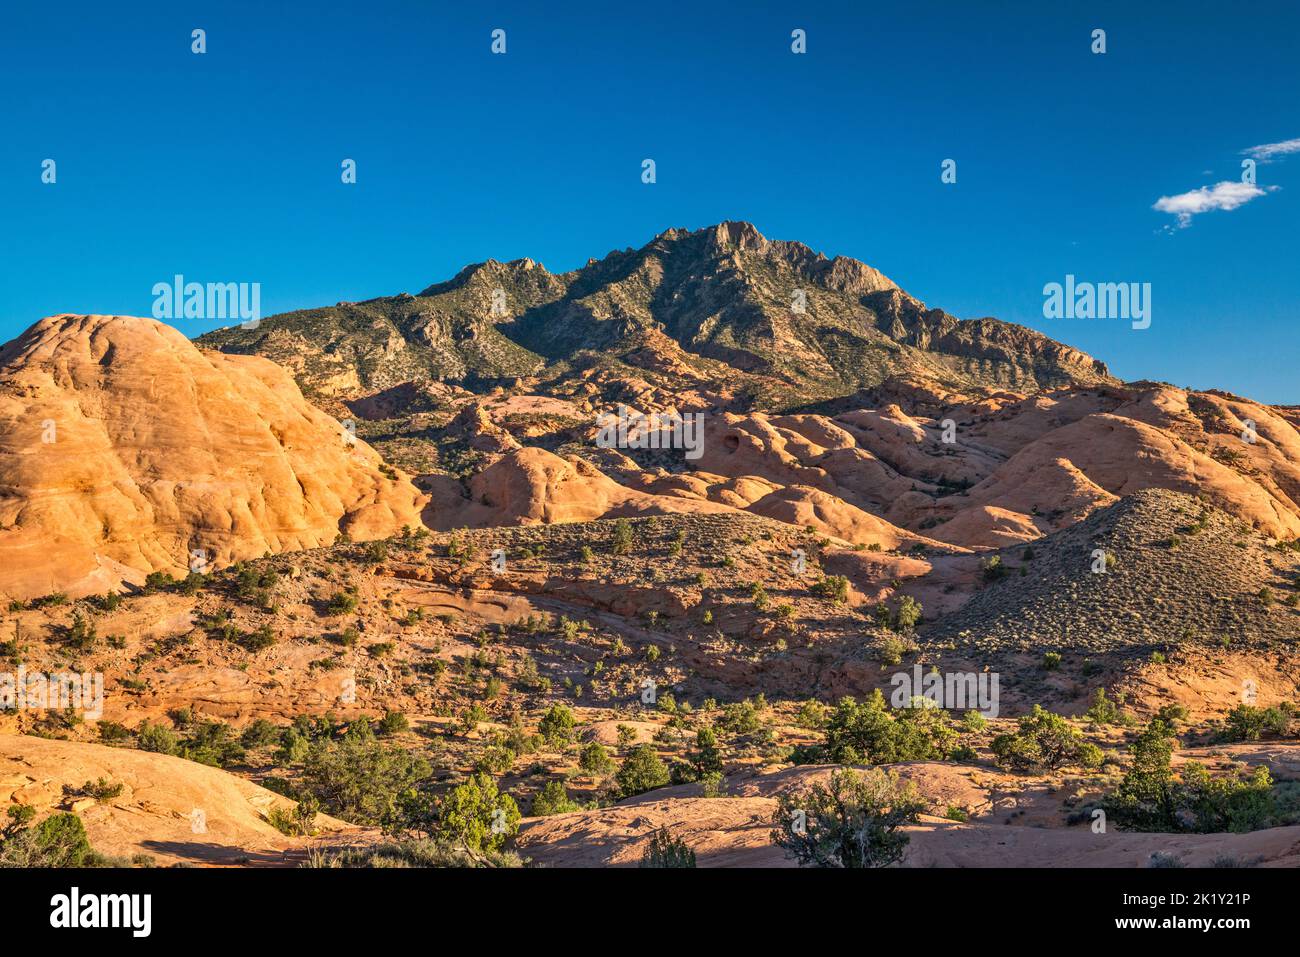 Mount Holmes, Navajo Sandstone slickrocks, view at sunset from Utah 276, Little Rockies, Henry Mountains, near Ticaboo, Utah, USA Stock Photo